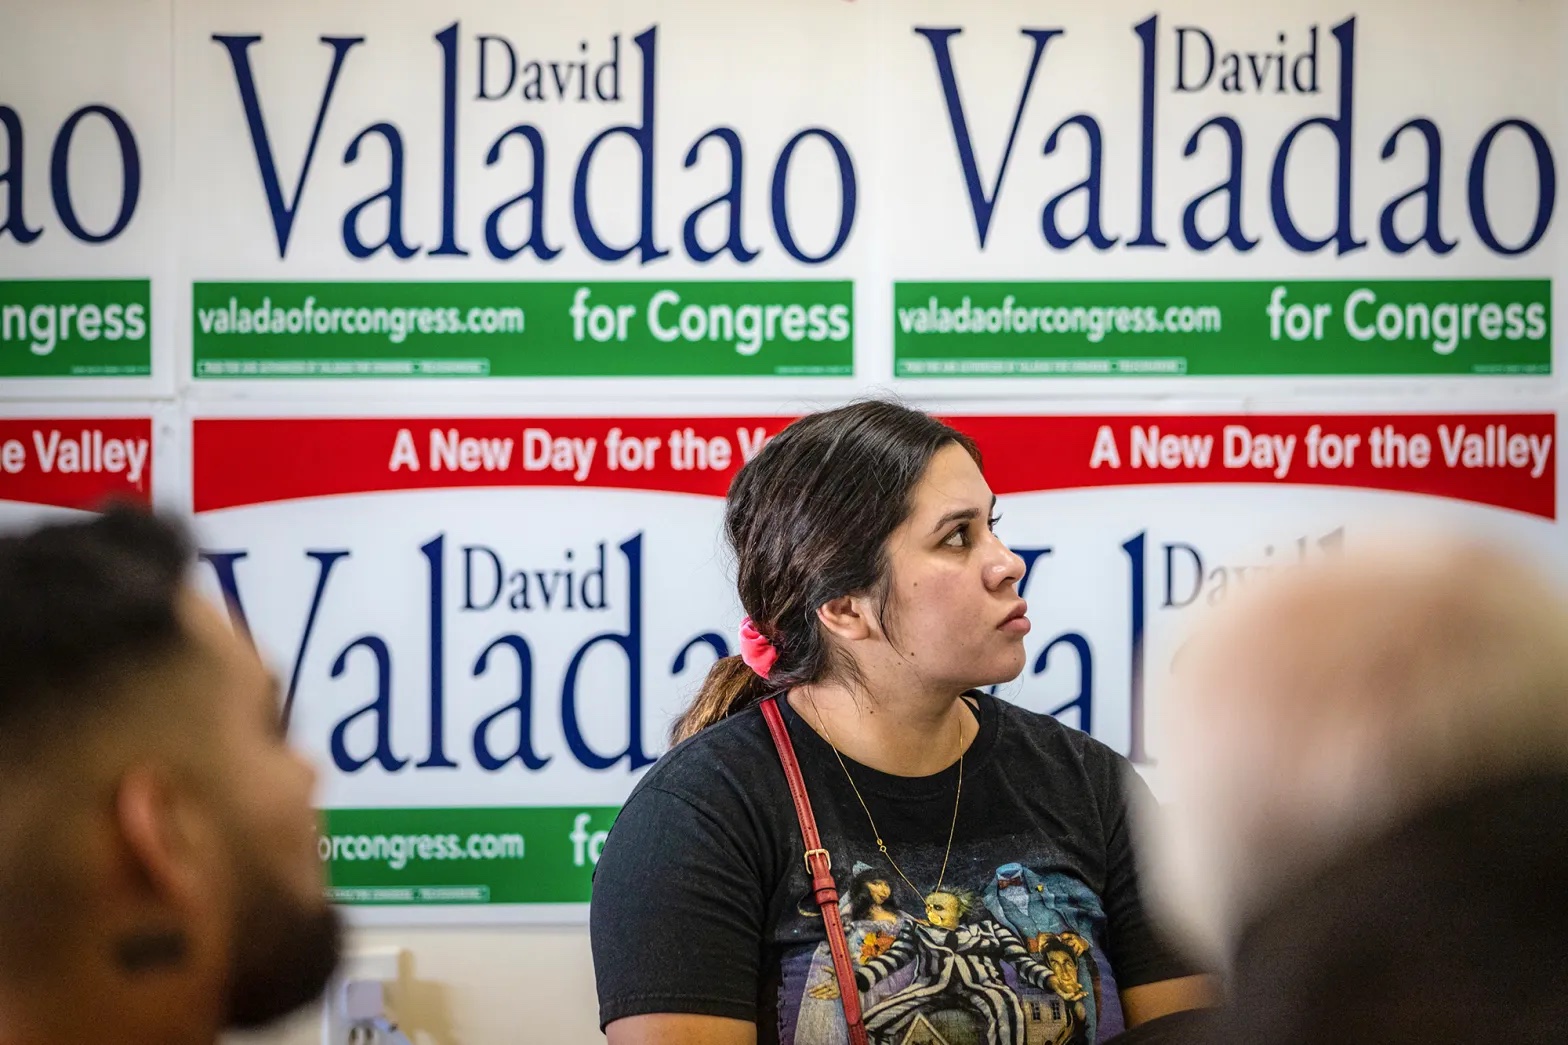 A young Latina woman looks on with a poster behind her that says "David Valadao for Congress"